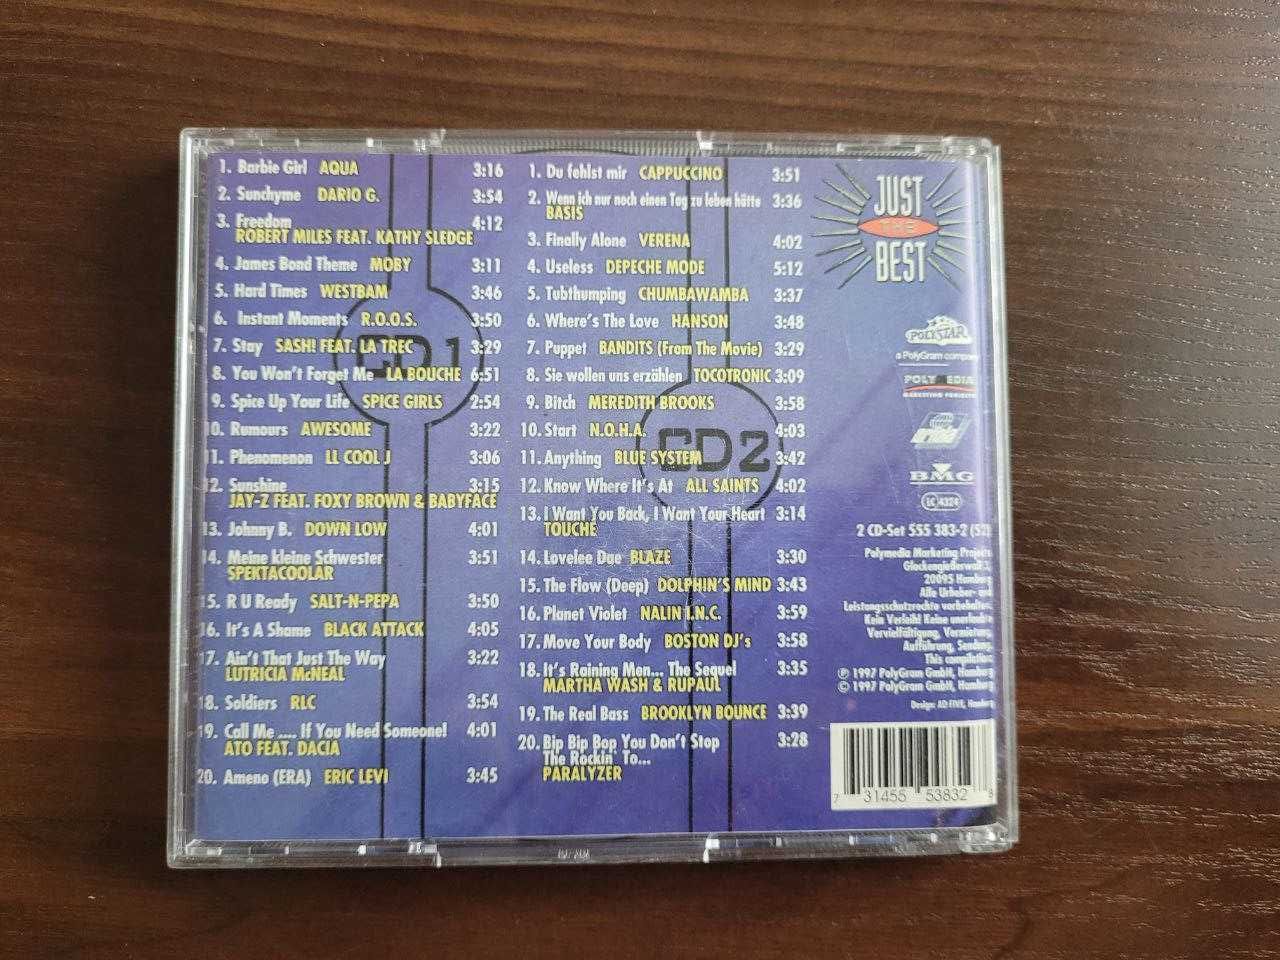 Just The Best vol. 14 CD